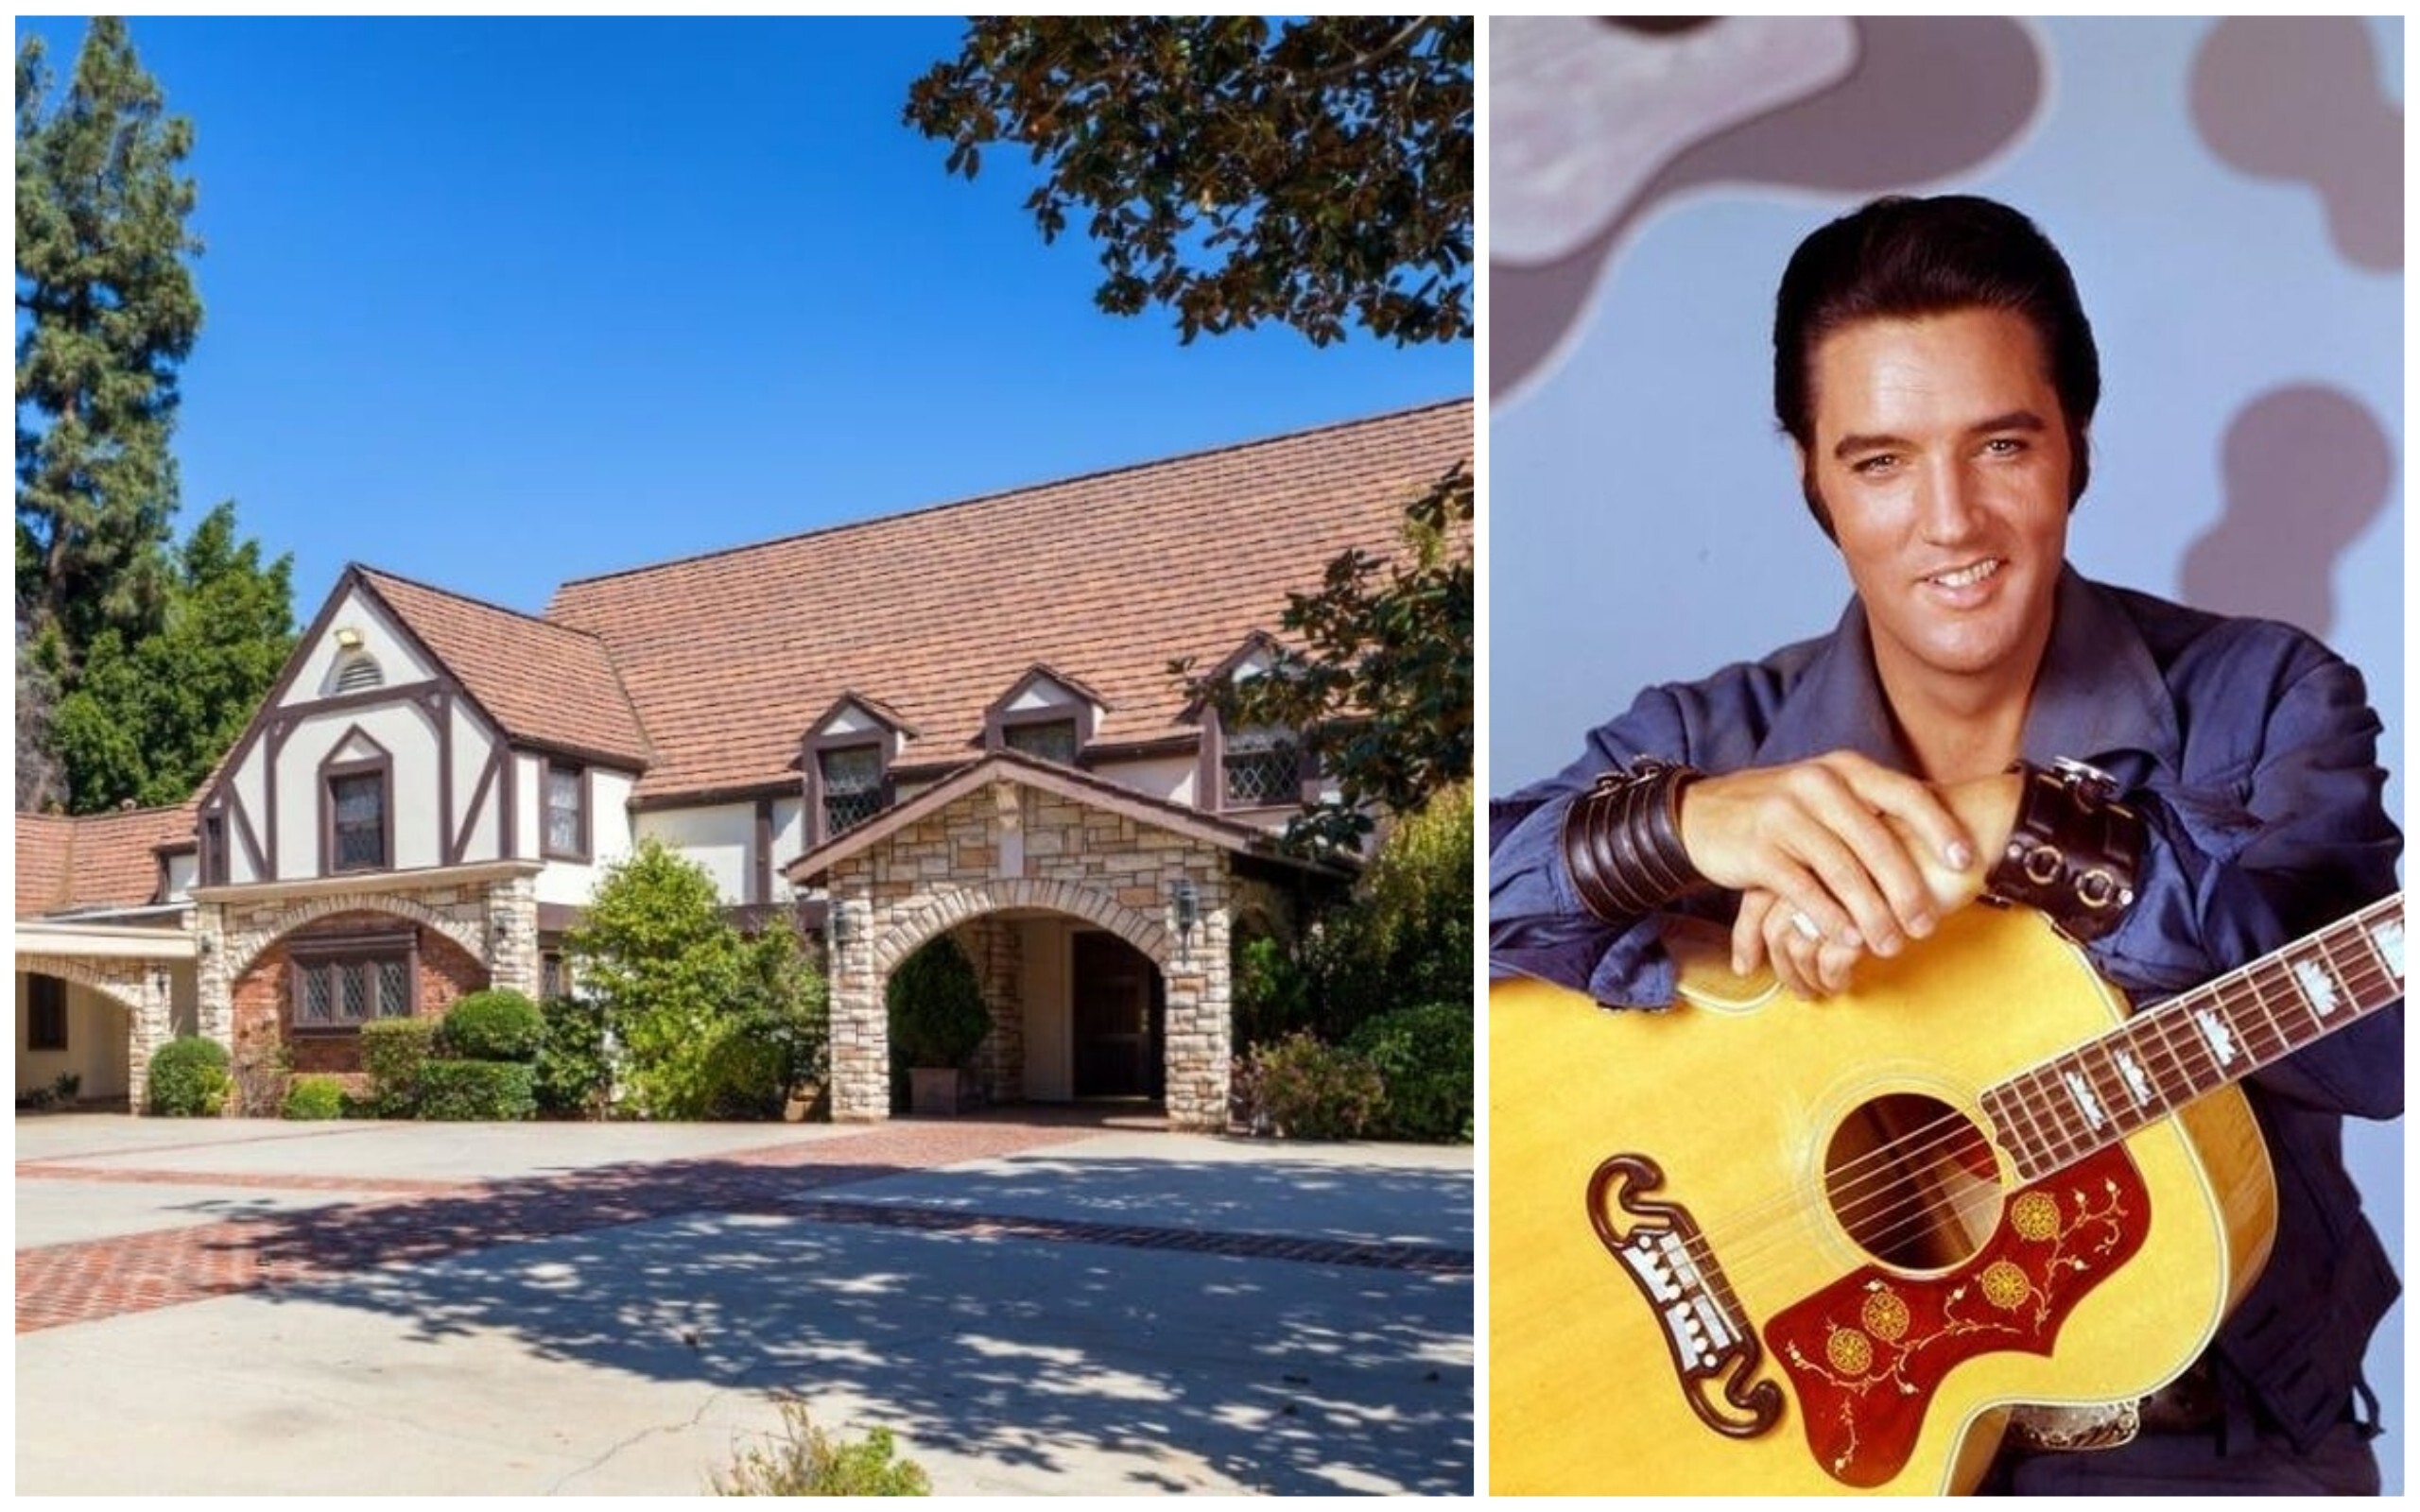 One of Elvis Presley’s former homes in Beverly Hills went for a pretty penny this month. Photo: Hilton & Hyland/Handout, @elvis/Instagram